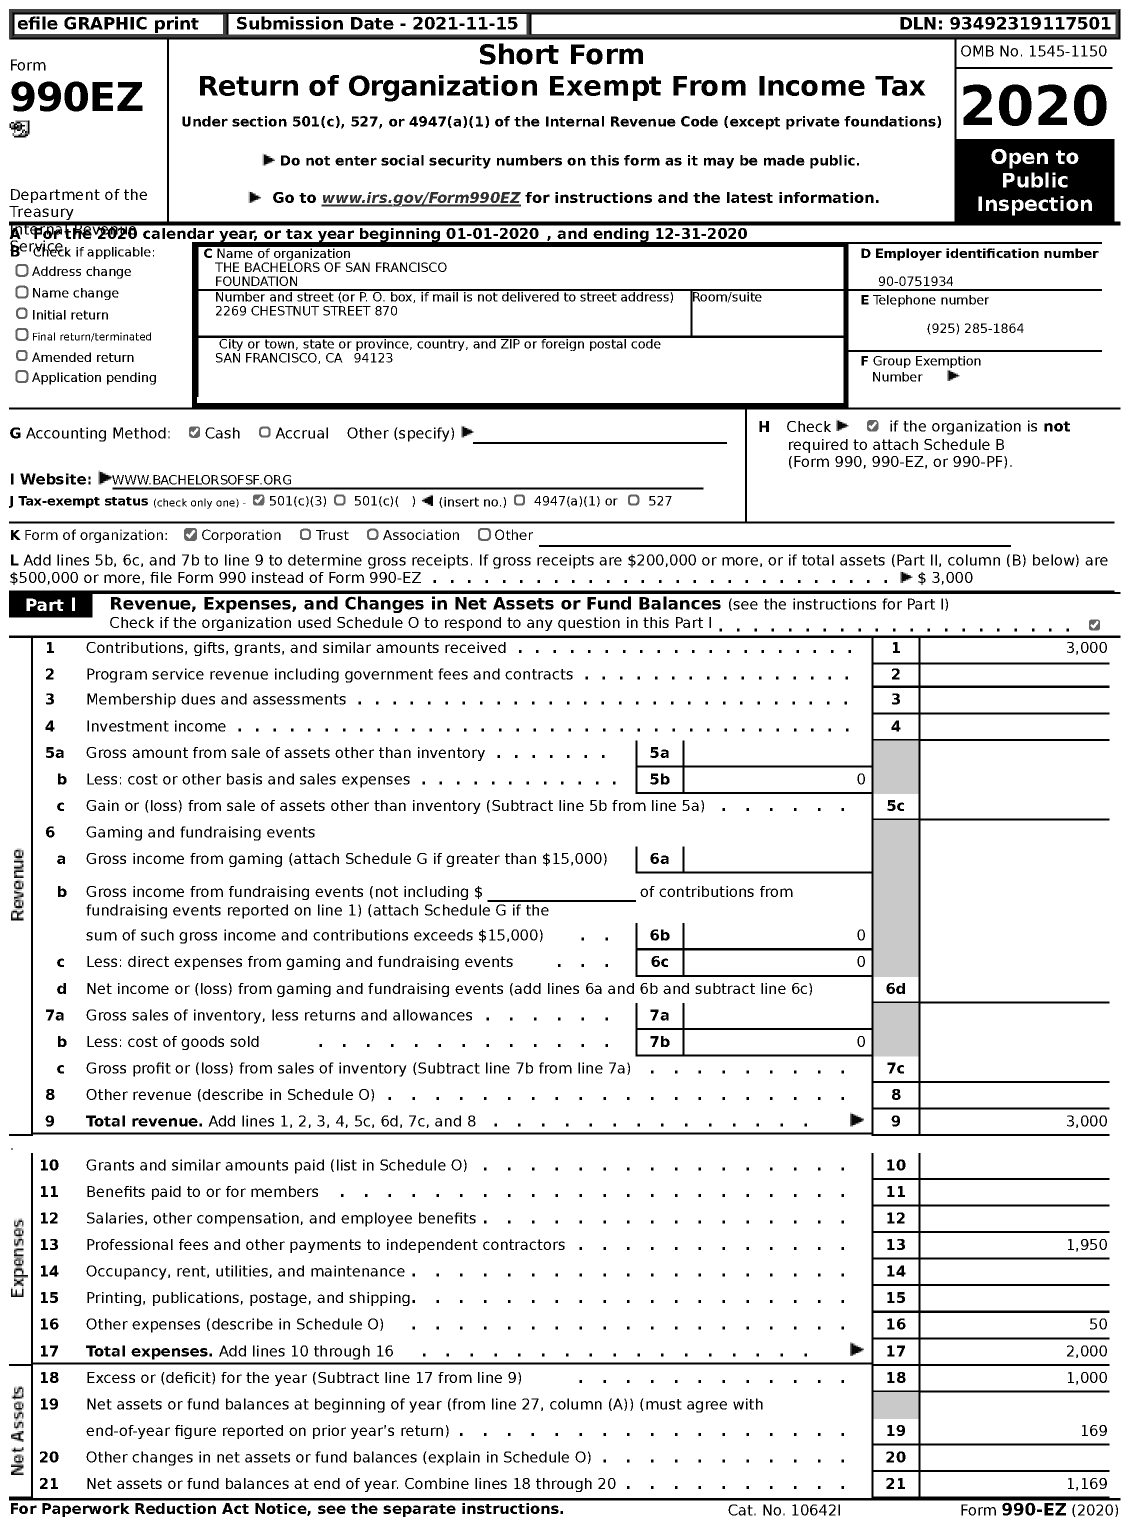 Image of first page of 2020 Form 990EZ for The Bachelors of San Francisco Foundation